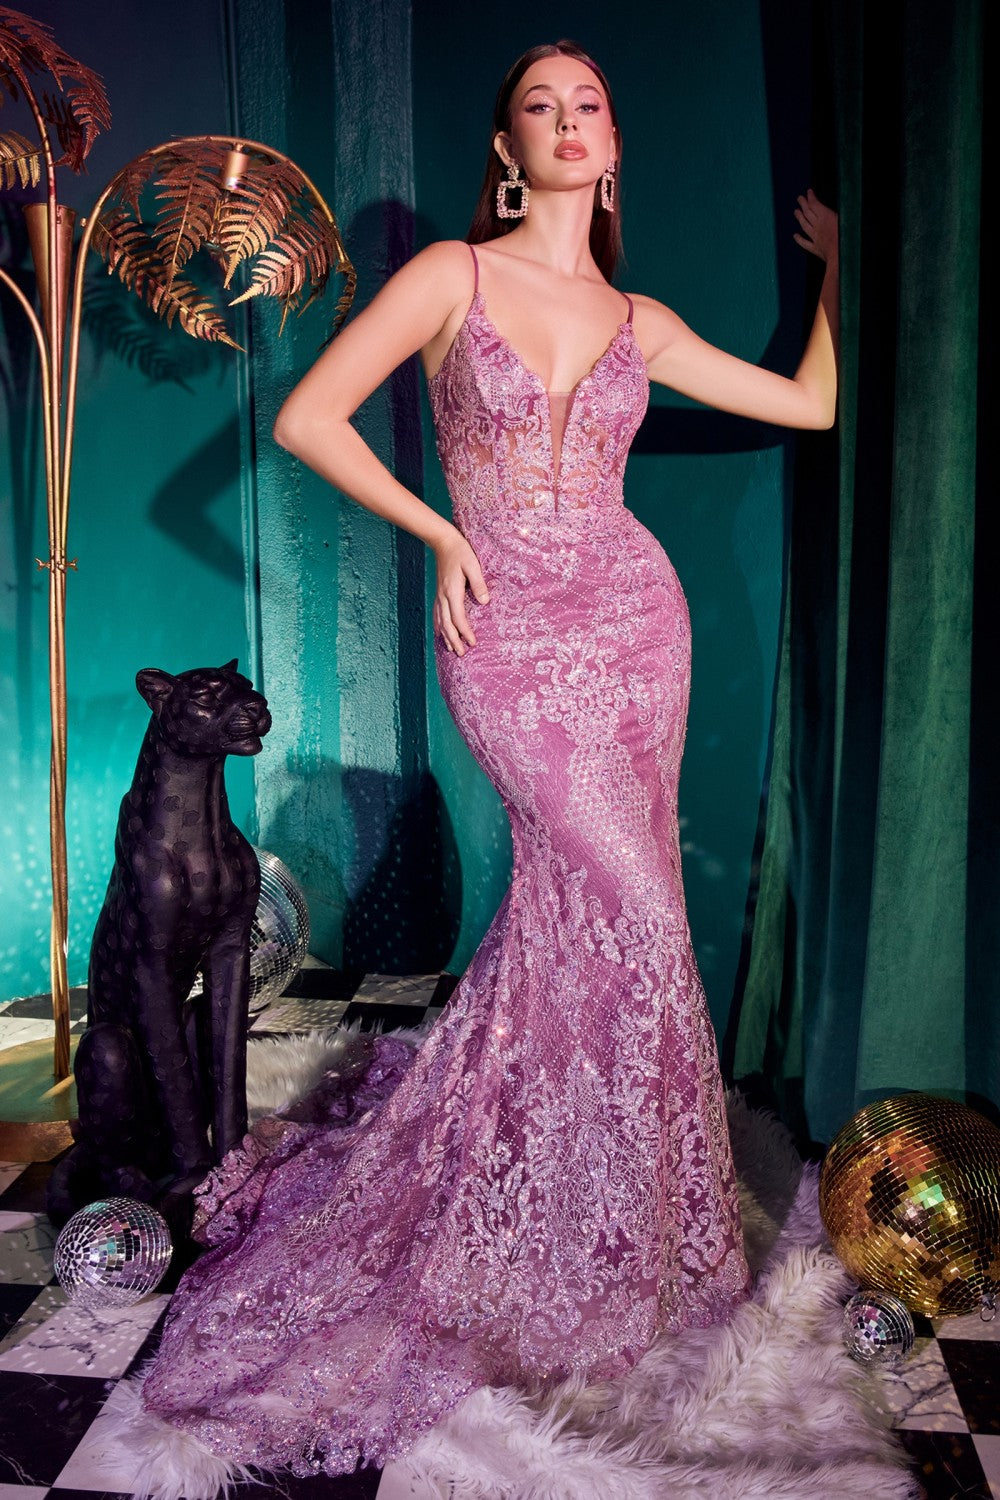 Amethyst Embellishment Print Mermaid Gown CC2189 - Women Evening Formal Gown - Special Occasion